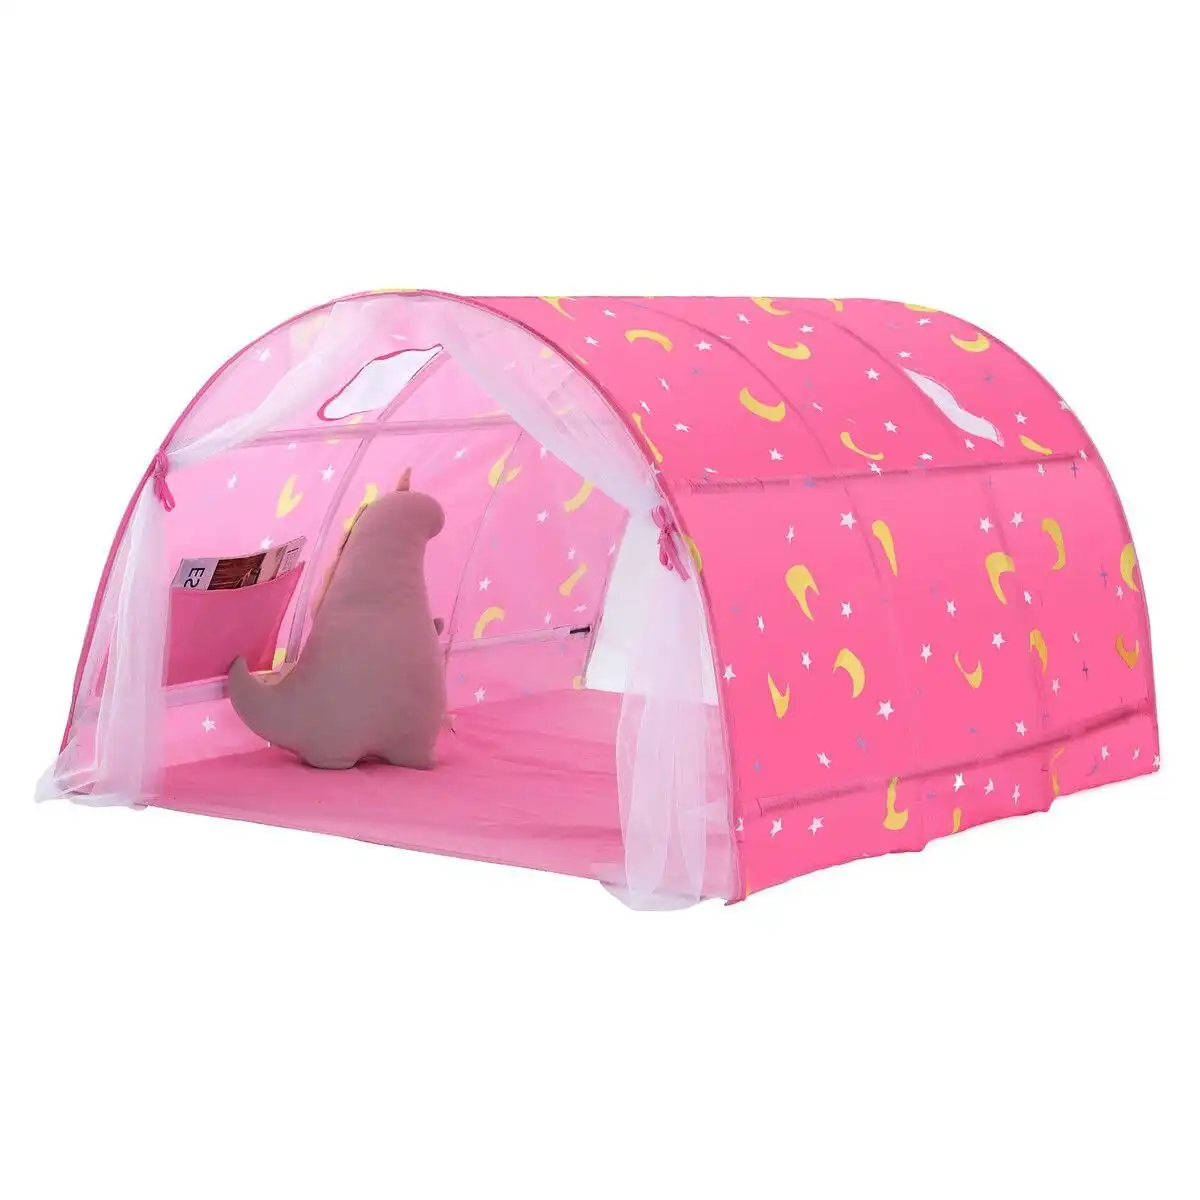 Ausway Playhouse Tent Portable Stars Bed Kids Play Game House Cottage DIY Sleeping Canopy Indoor Outdoor Pink